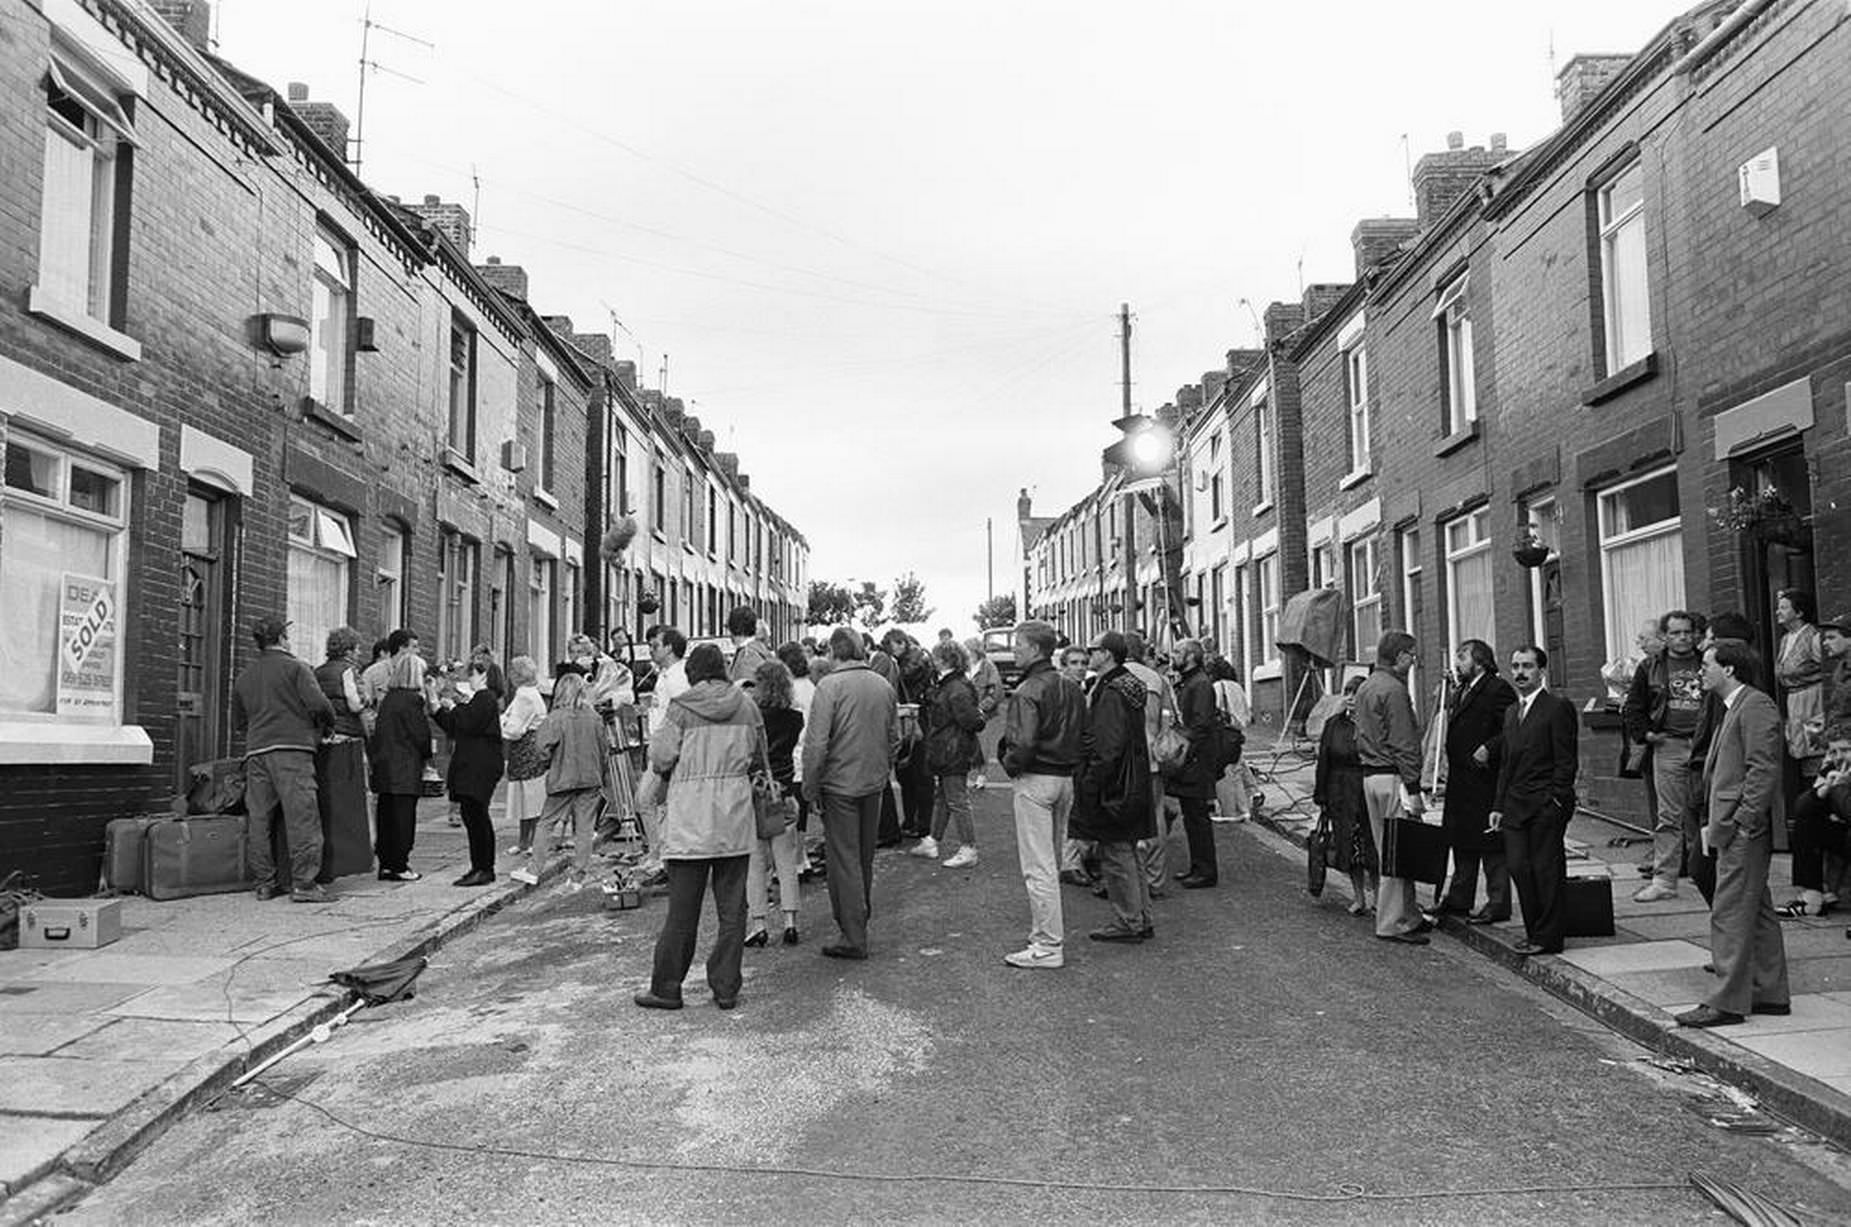 The BBC in Elswick Street, Dingle filming the hit comedy "Bread" 11th July 1987